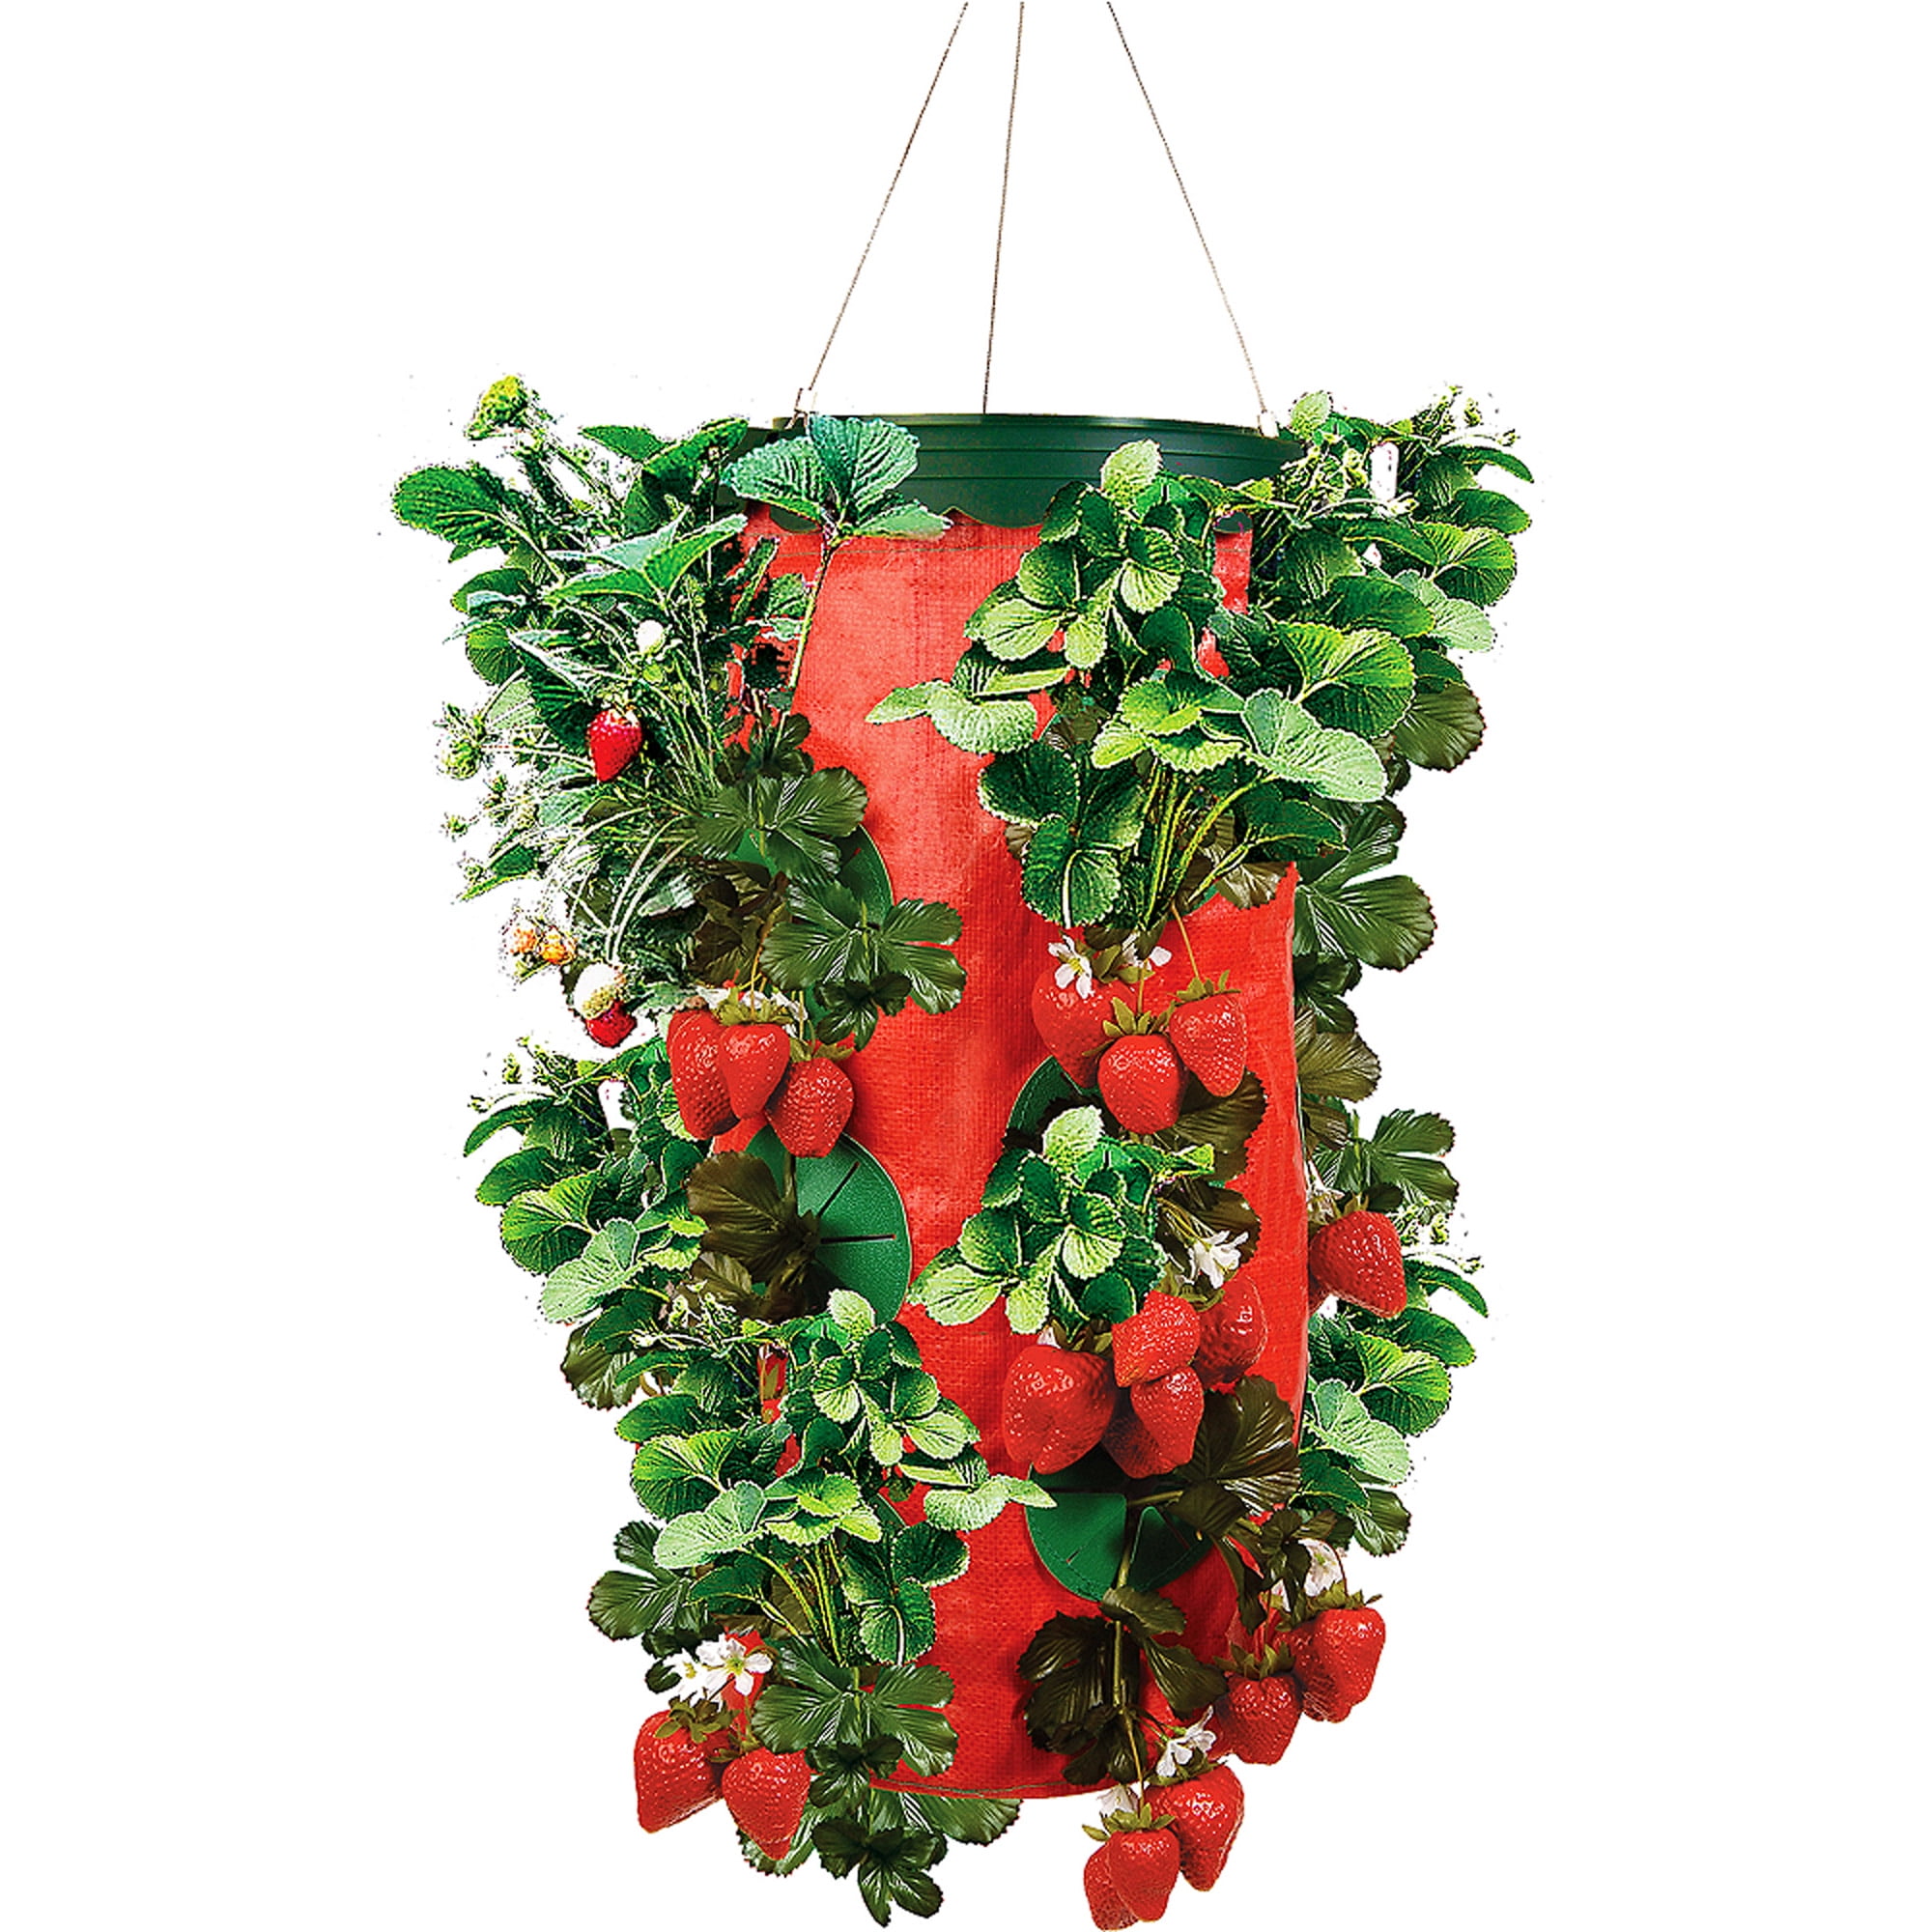 Pack of 3 Topsy Turvy STRAWBERRY HANGING PLANTER Upside Down Swivel Top 